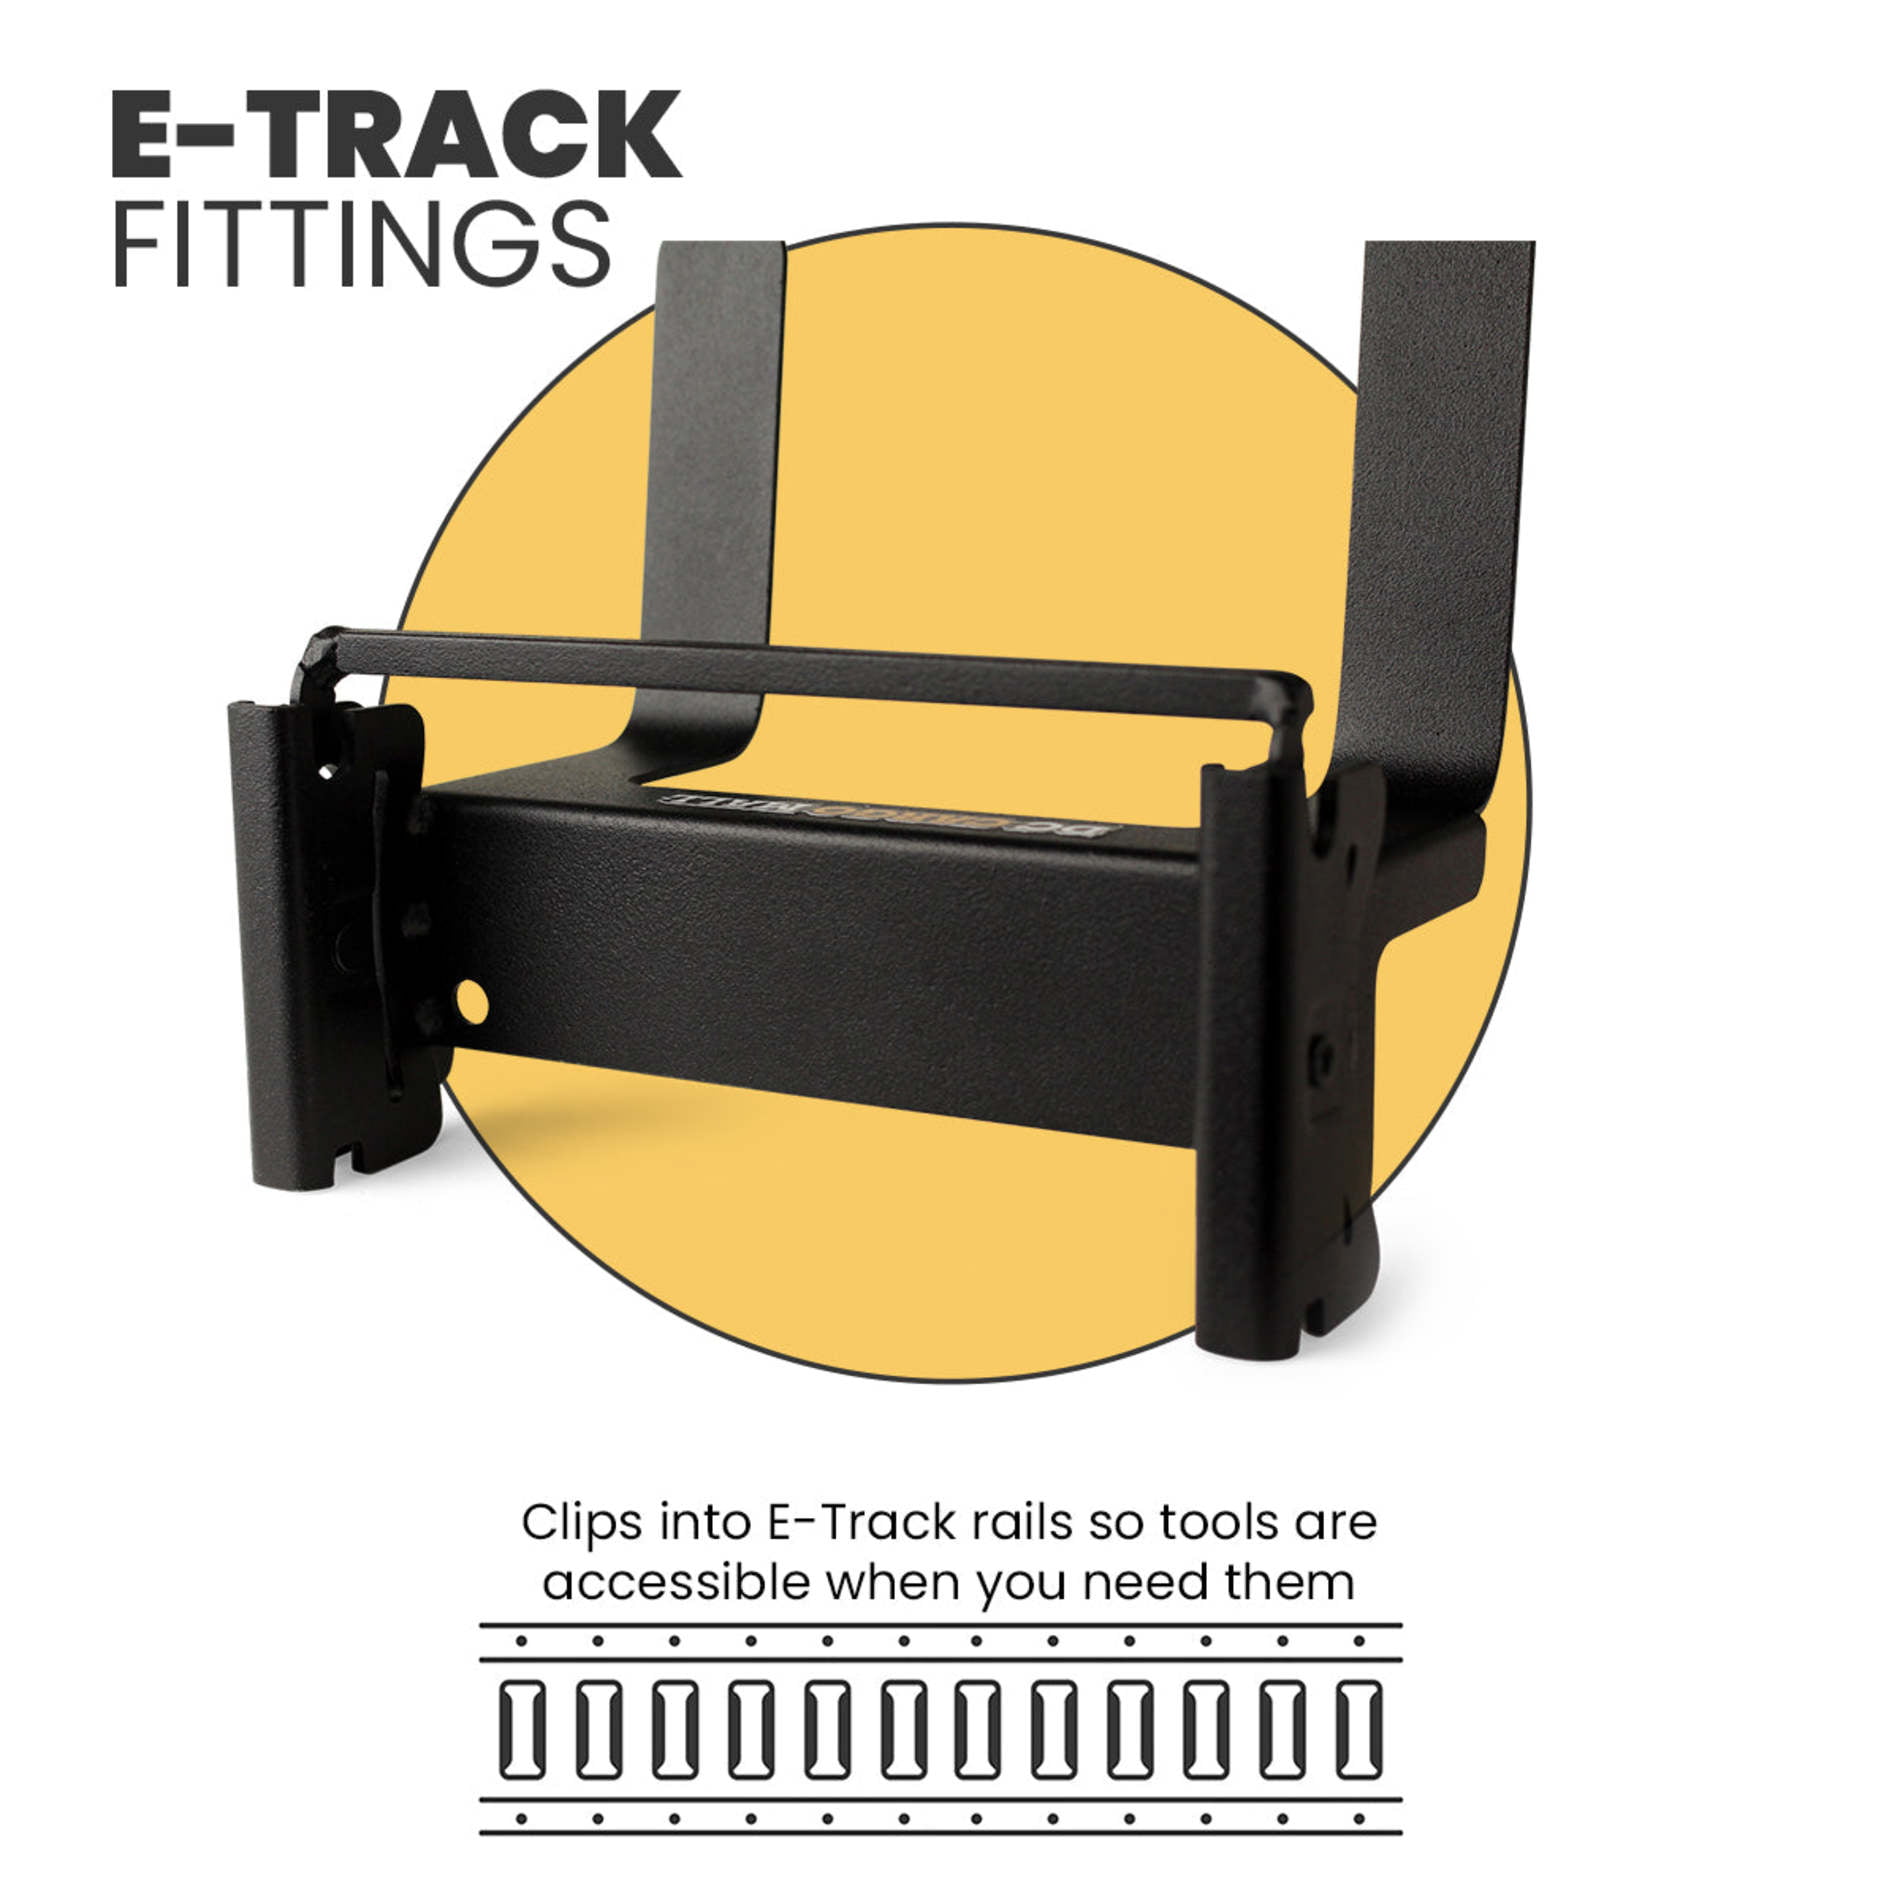 E-Track Steel JHook Tie-Down Accessory w/ E Track Spring Fitting  Attachment, 2 Inch Wide J Hook, Use as Hanger, Shelf Bracket, Support  Beams, for